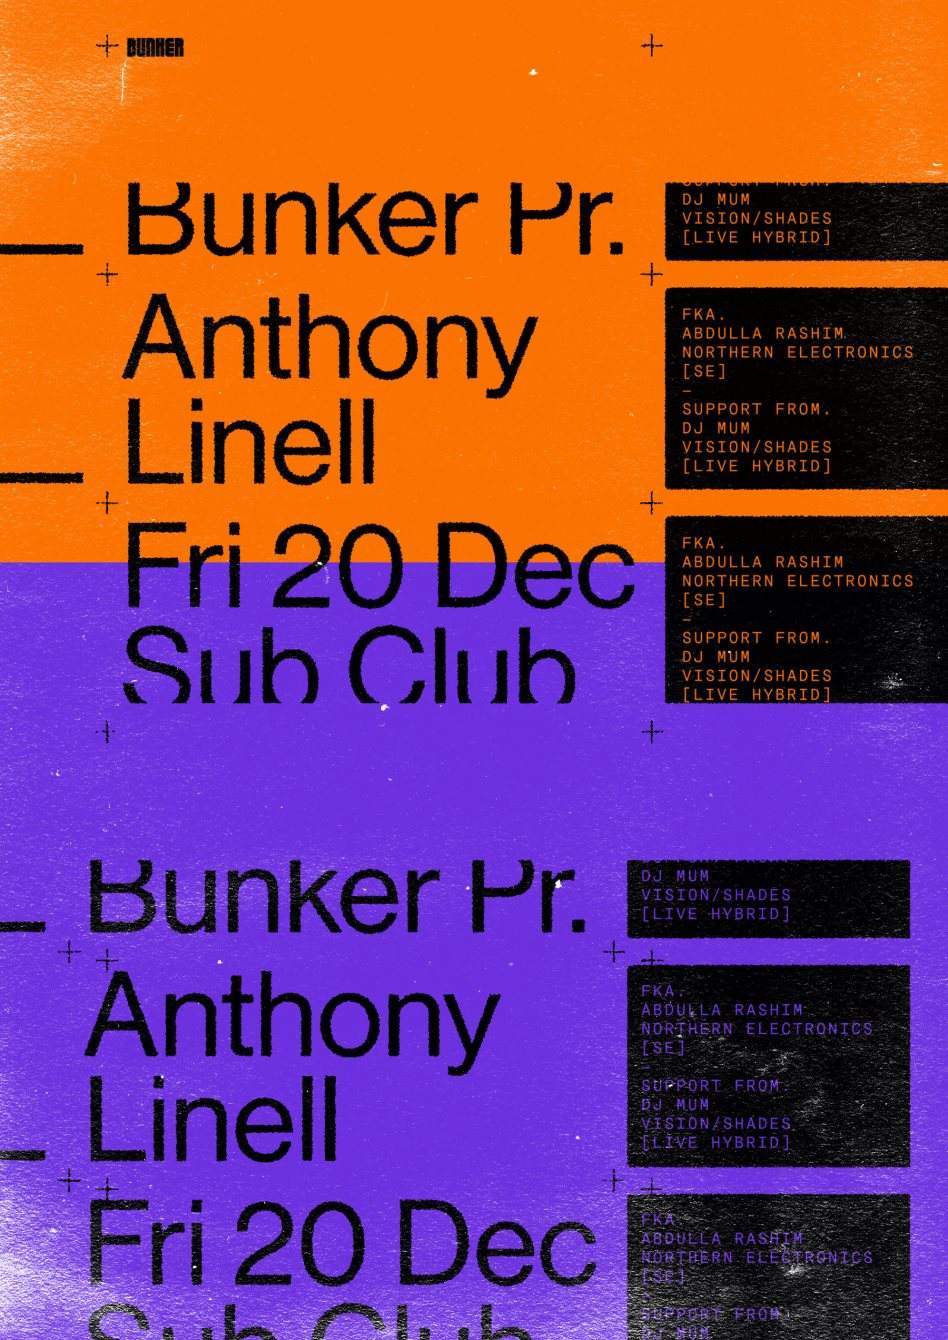 Bunker presents Anthony Linell - Página frontal